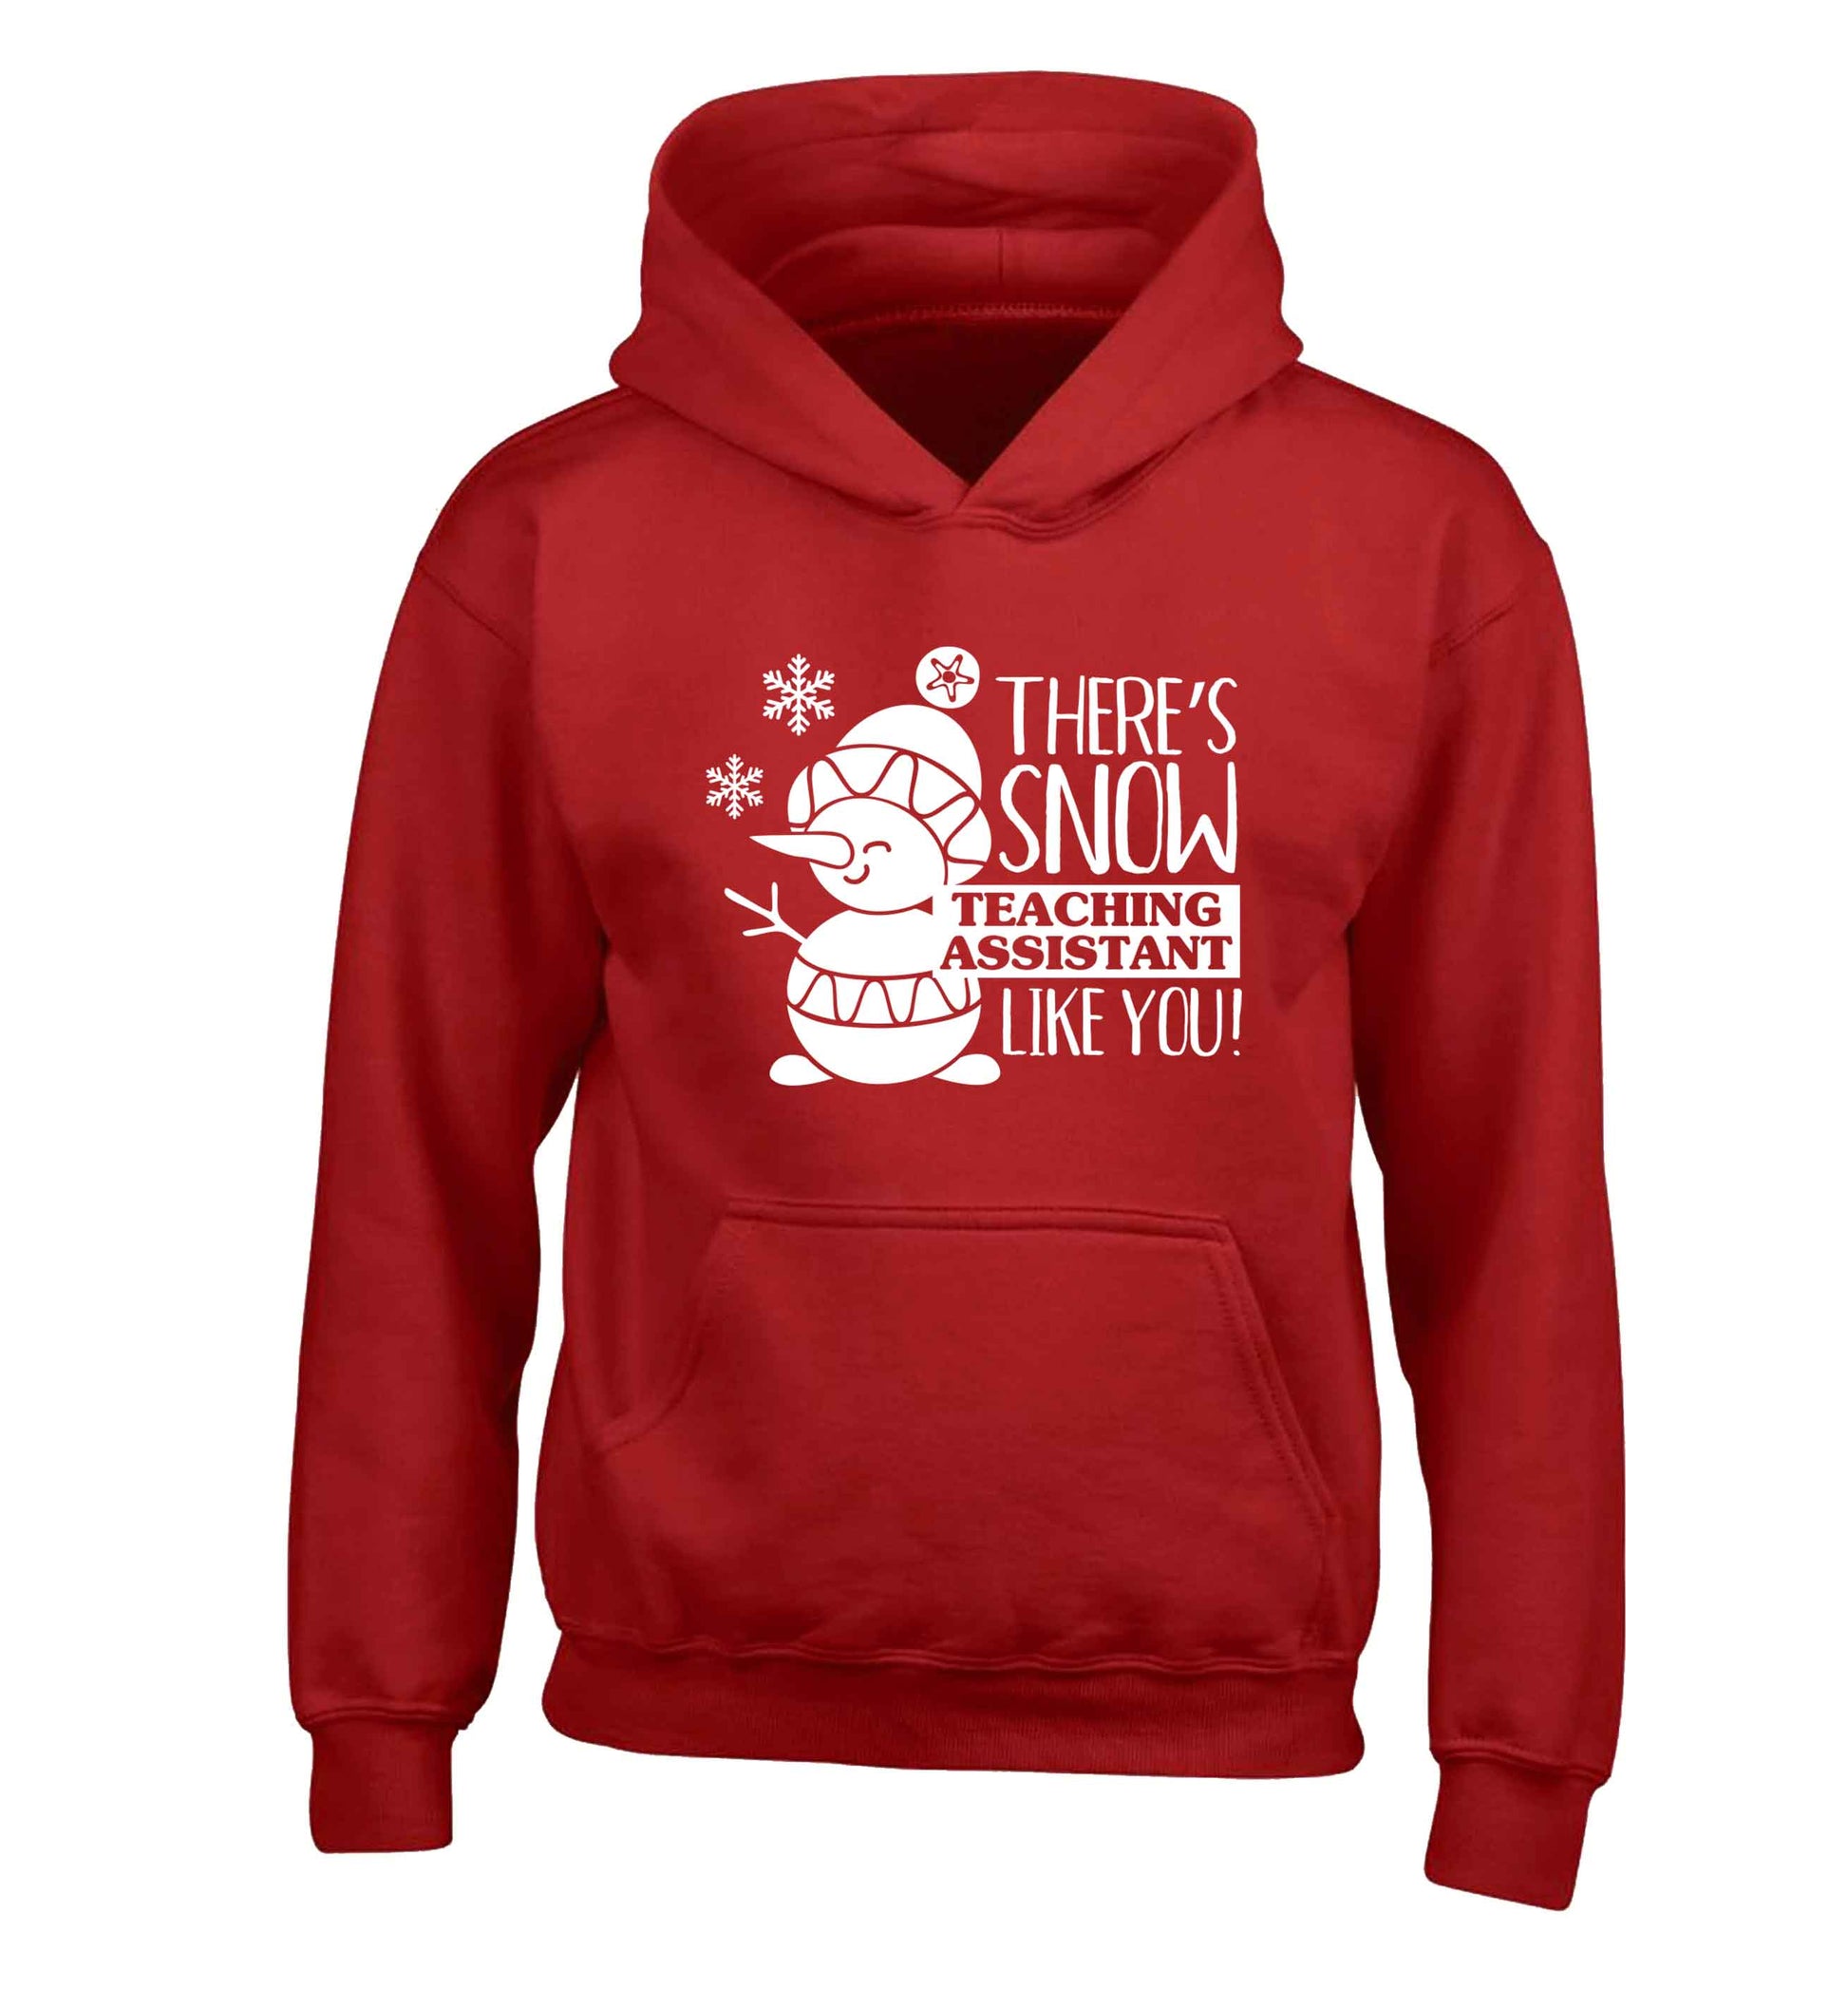 There's snow teaching assistant like you children's red hoodie 12-13 Years